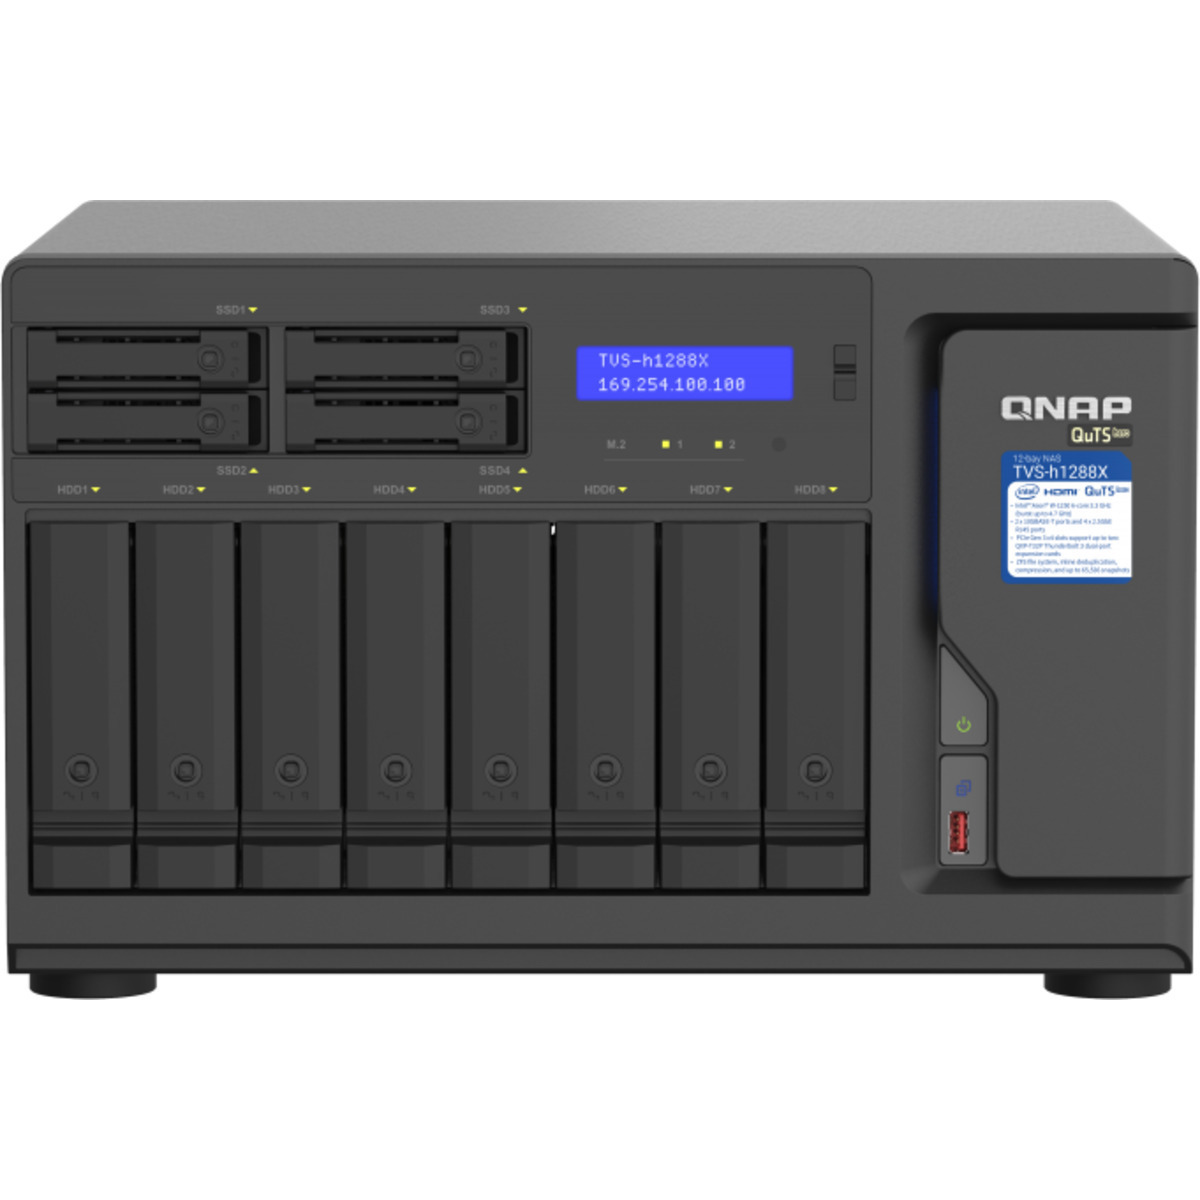 QNAP TVS-h1288X QuTS hero NAS 64tb 8+4-Bay Desktop Multimedia / Power User / Business NAS - Network Attached Storage Device 4x16tb Seagate IronWolf Pro ST16000NT001 3.5 7200rpm SATA 6Gb/s HDD NAS Class Drives Installed - Burn-In Tested - ON SALE TVS-h1288X QuTS hero NAS